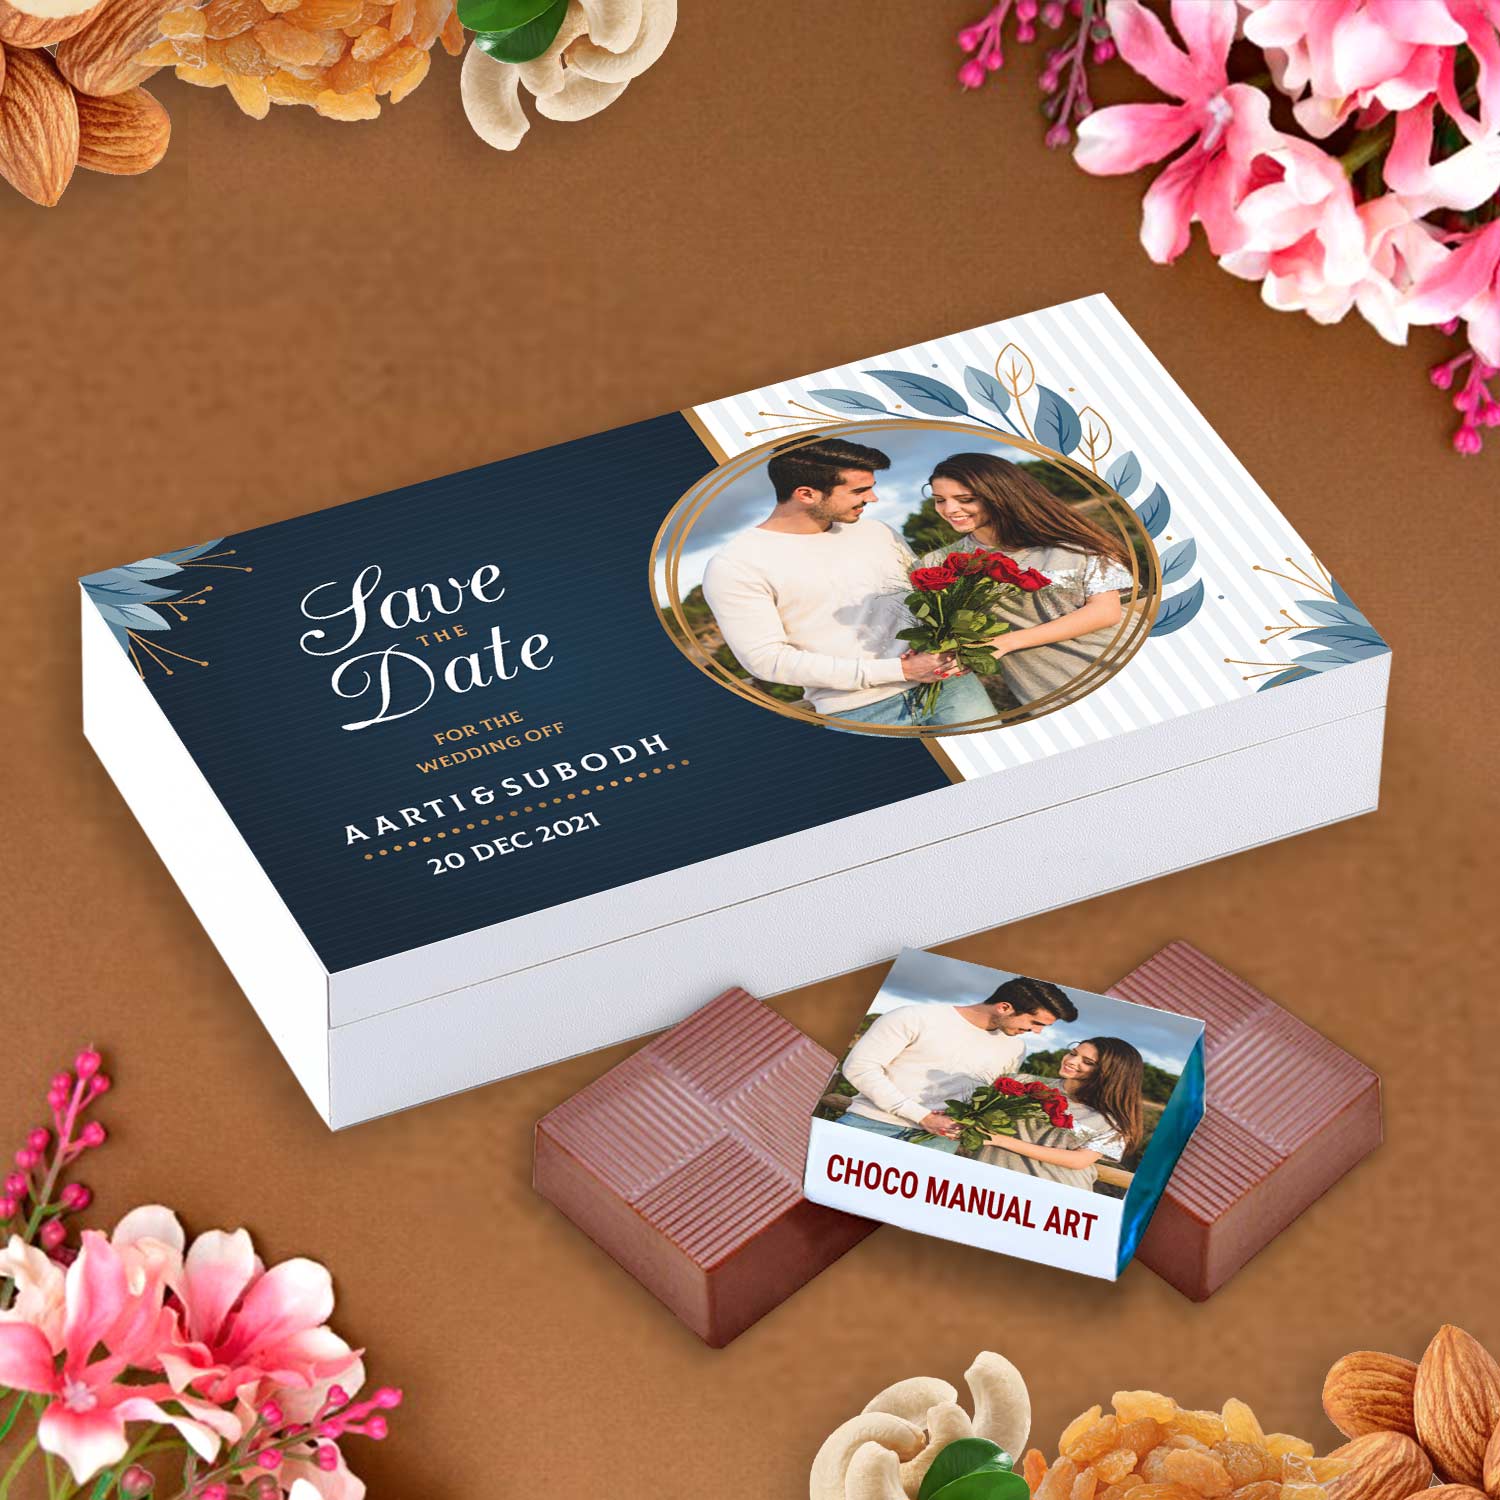 Customized white wooden box with all wrapper printed chocolates. There is also a personalized message printed on Message paper inside the box.